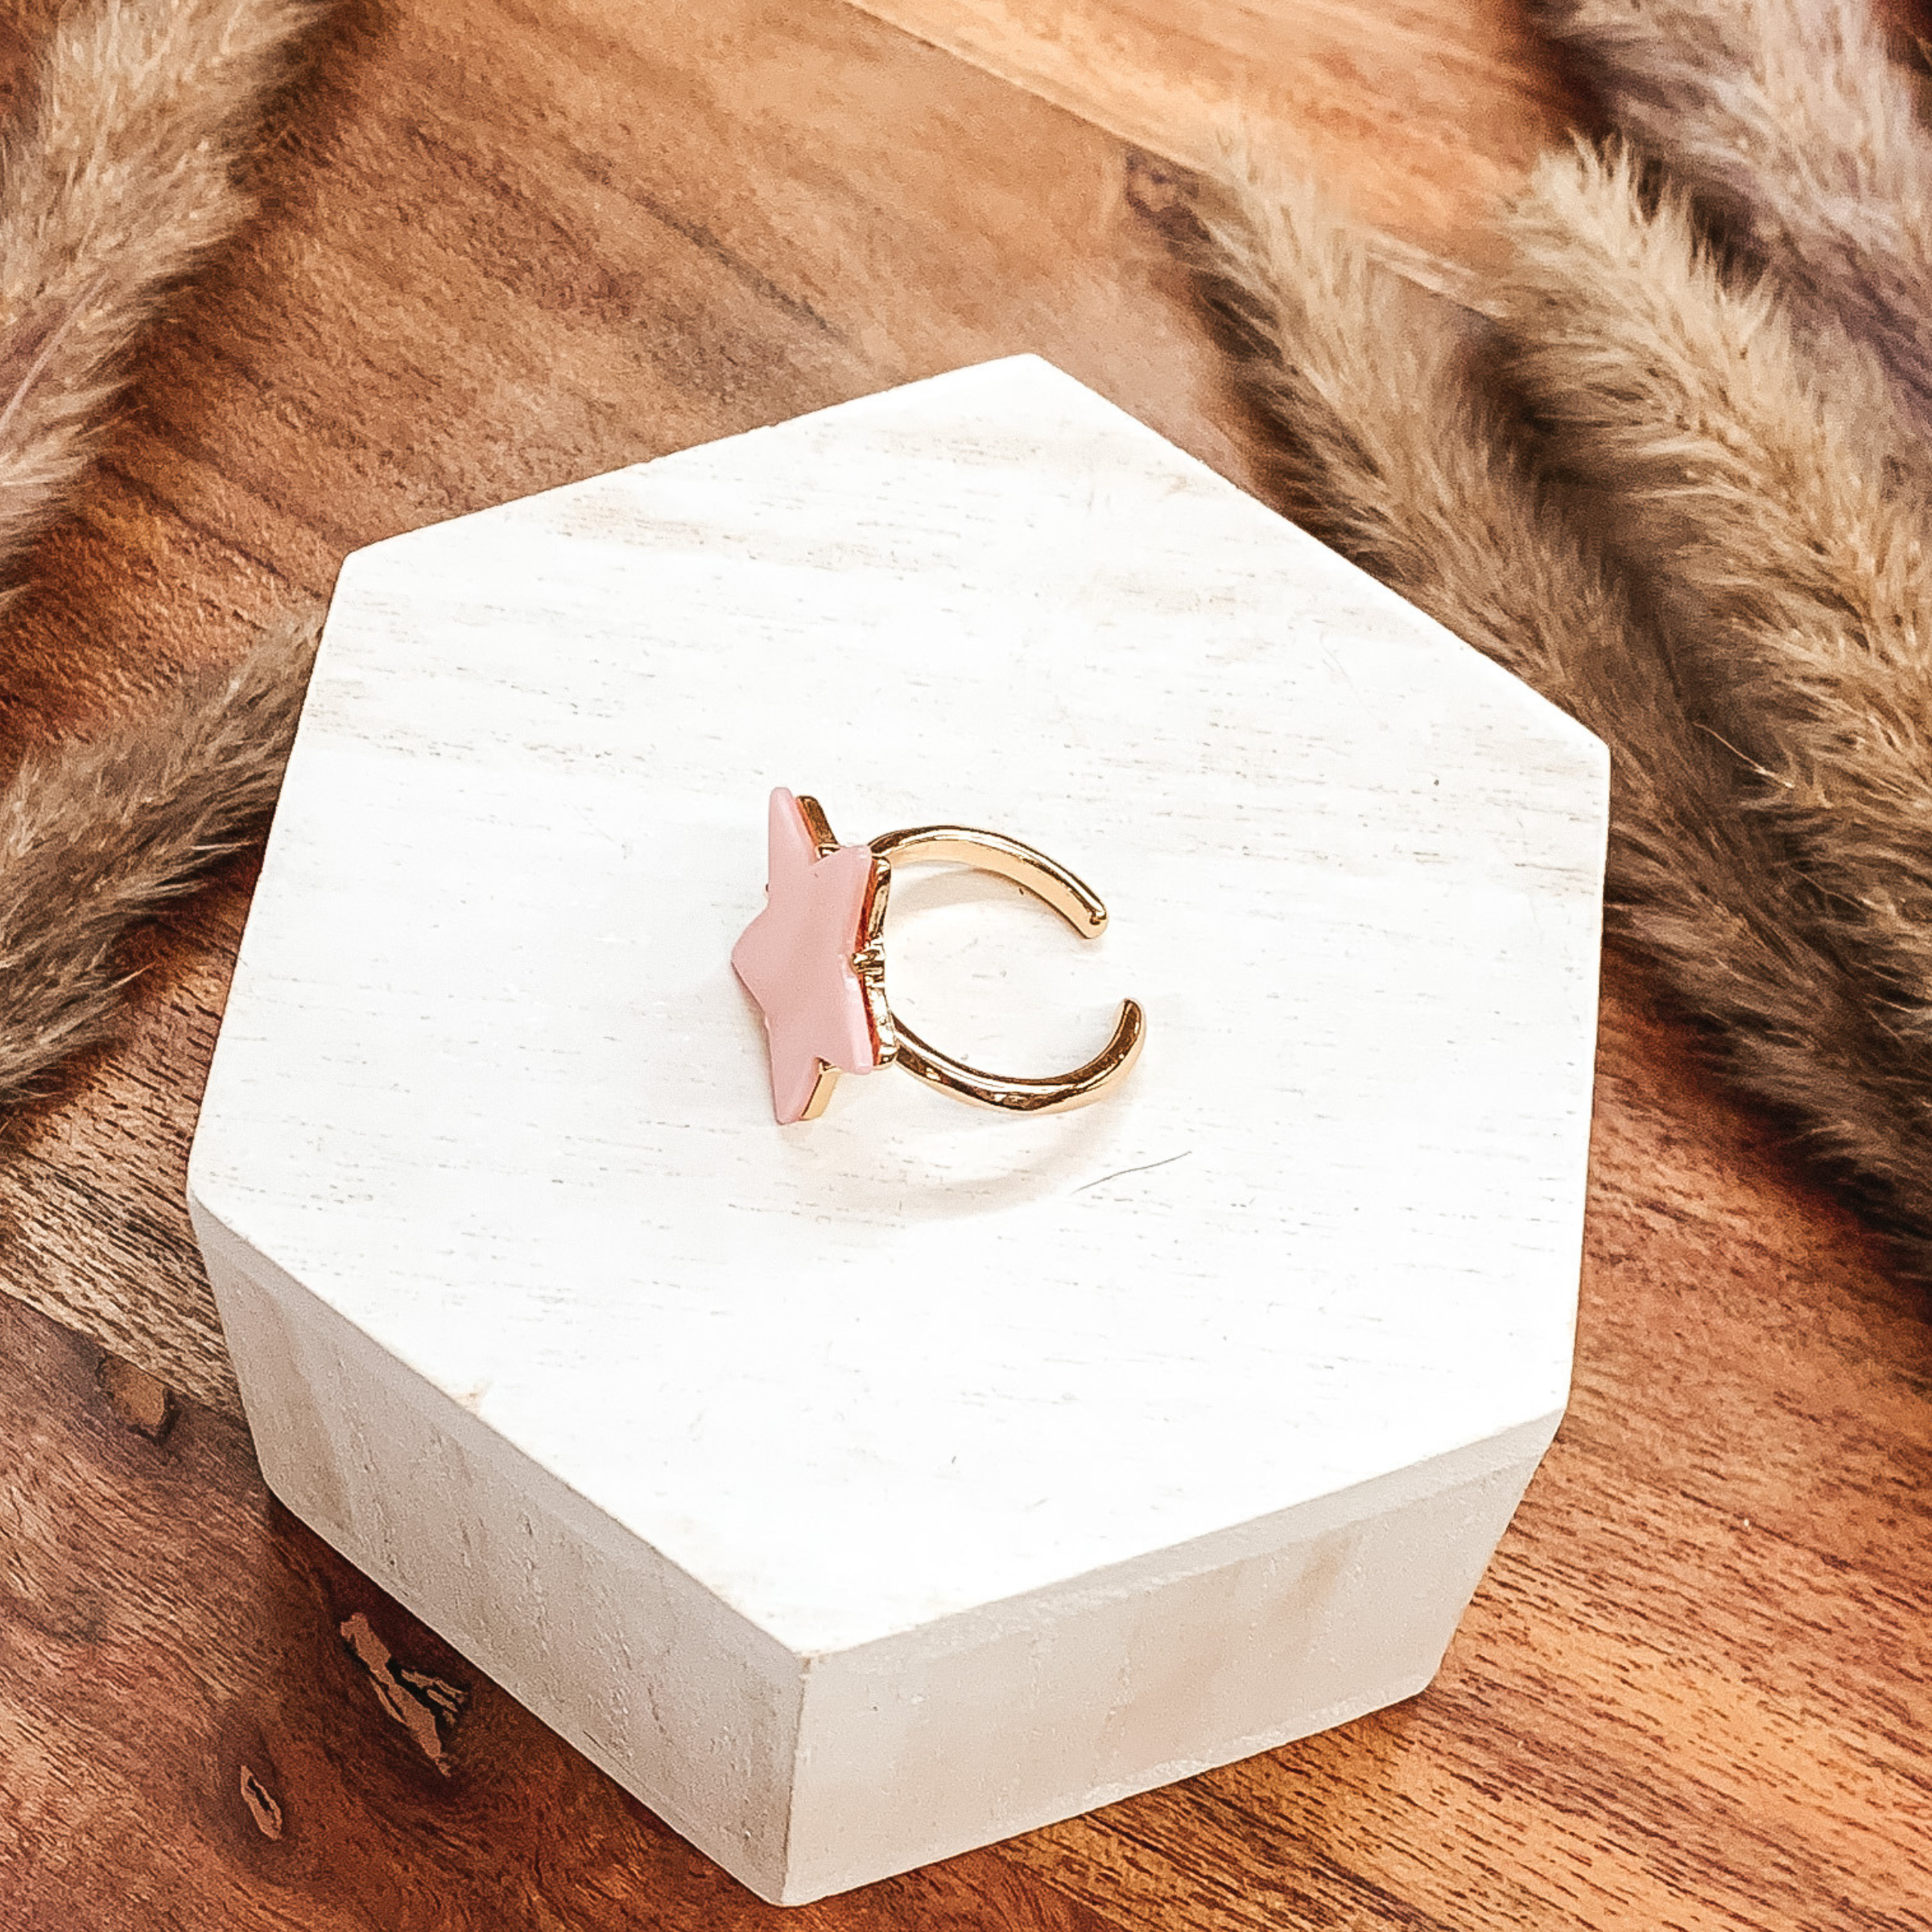 Wishing on Stars Ring in Light Pink - Giddy Up Glamour Boutique